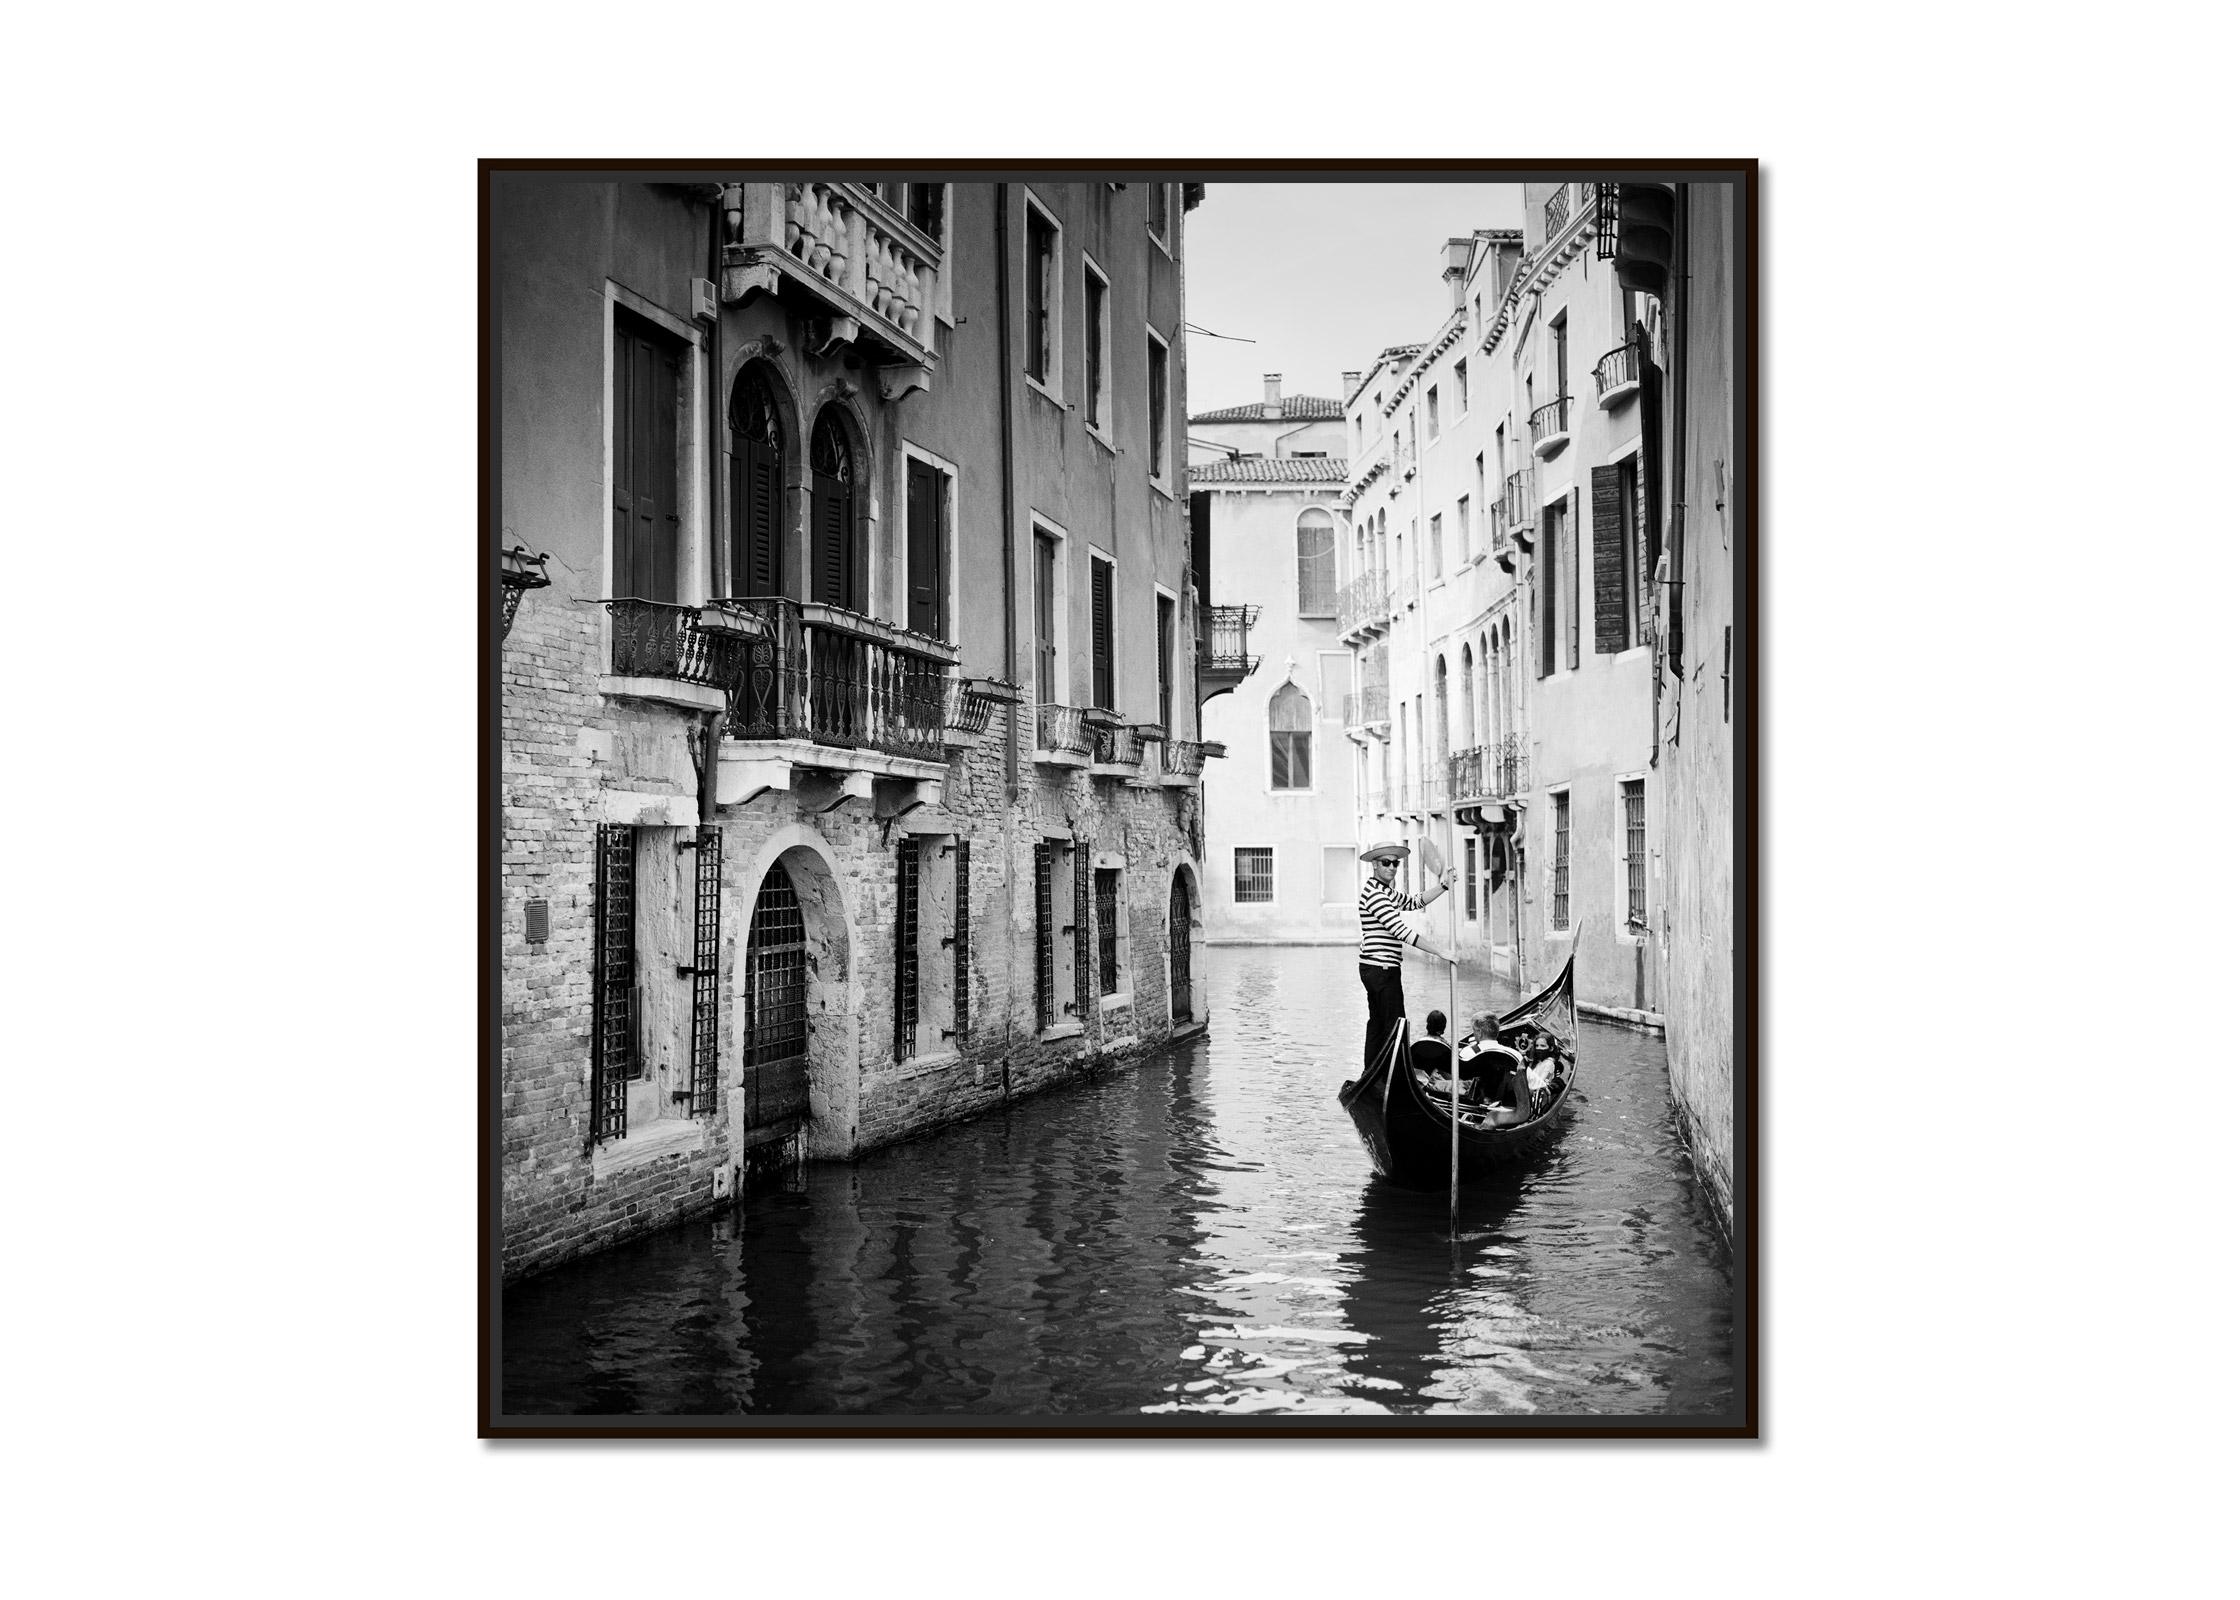 Gondoliere, Venice, Italy, fine art, black and white art landscape photography - Photograph by Gerald Berghammer